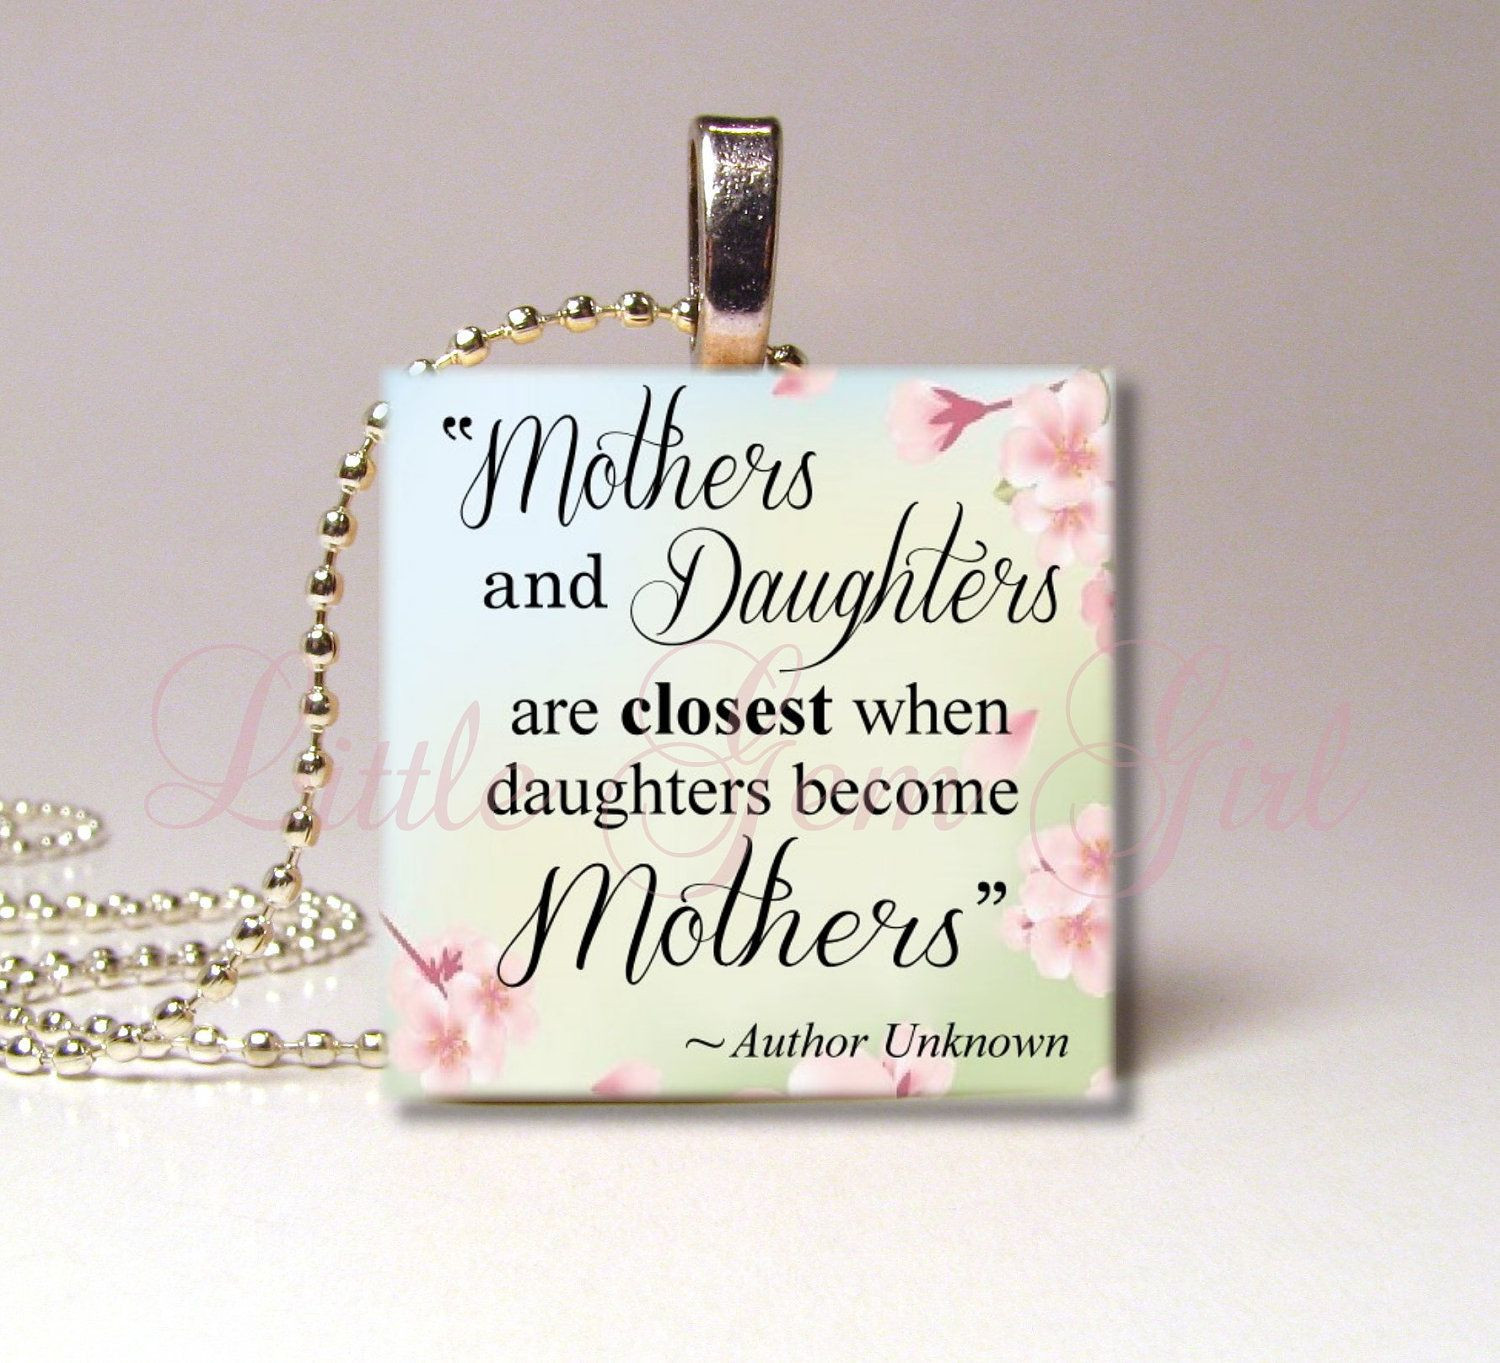 Mother Day Quotes From Daughter
 7 Unique Mother’s Day Quotes from Daughter in English